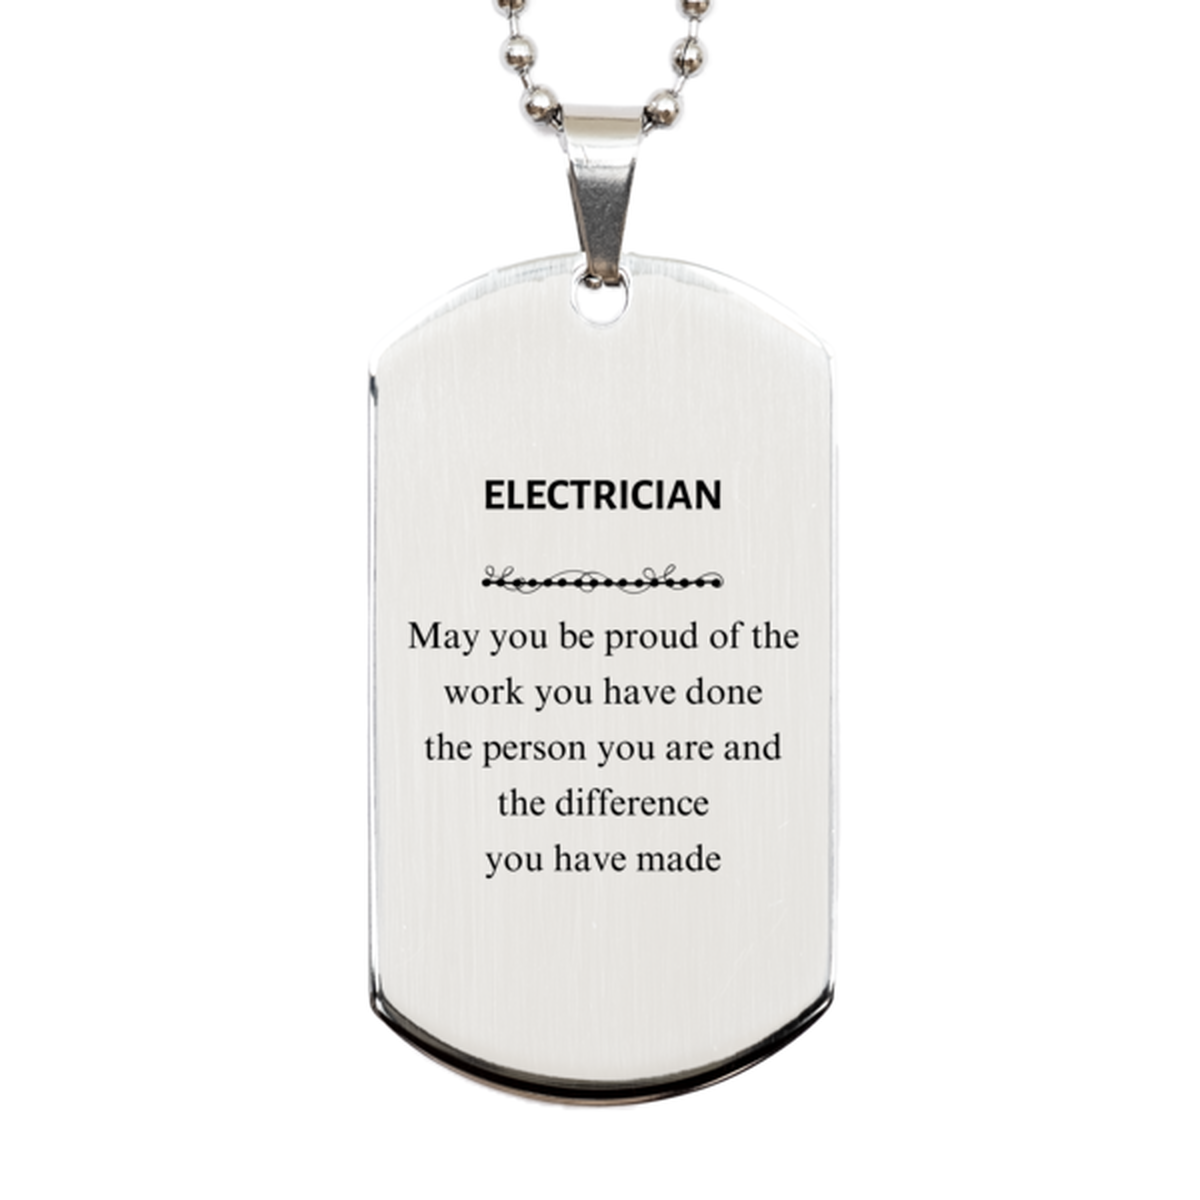 Electrician May you be proud of the work you have done, Retirement Electrician Silver Dog Tag for Colleague Appreciation Gifts Amazing for Electrician